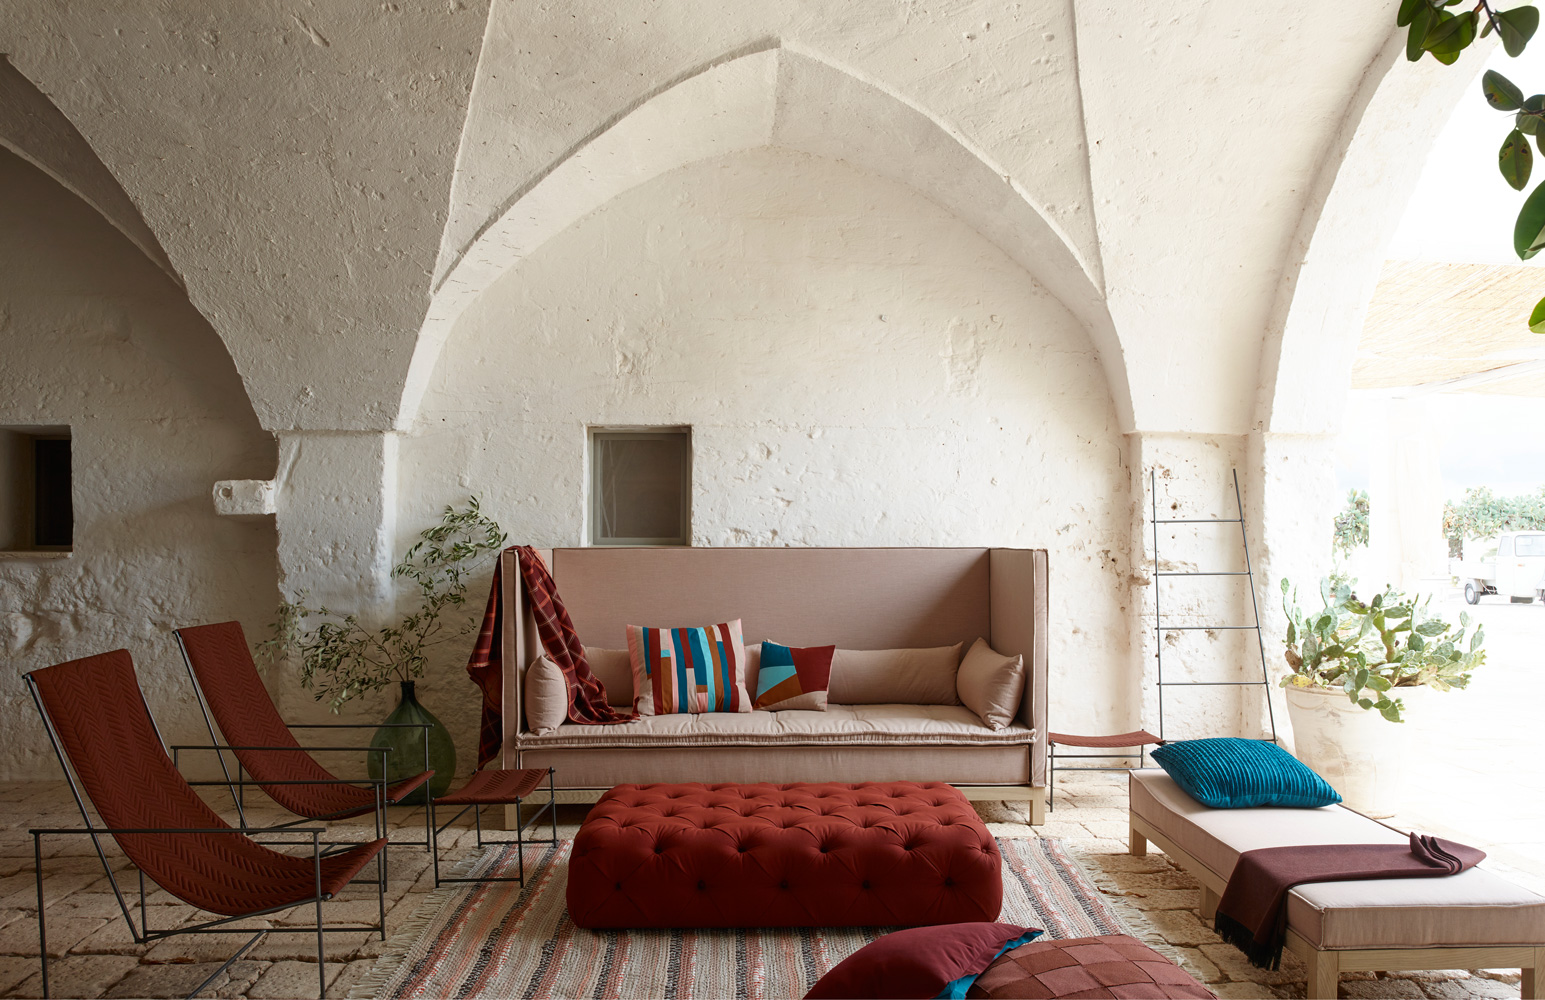 Spaces: : Couch